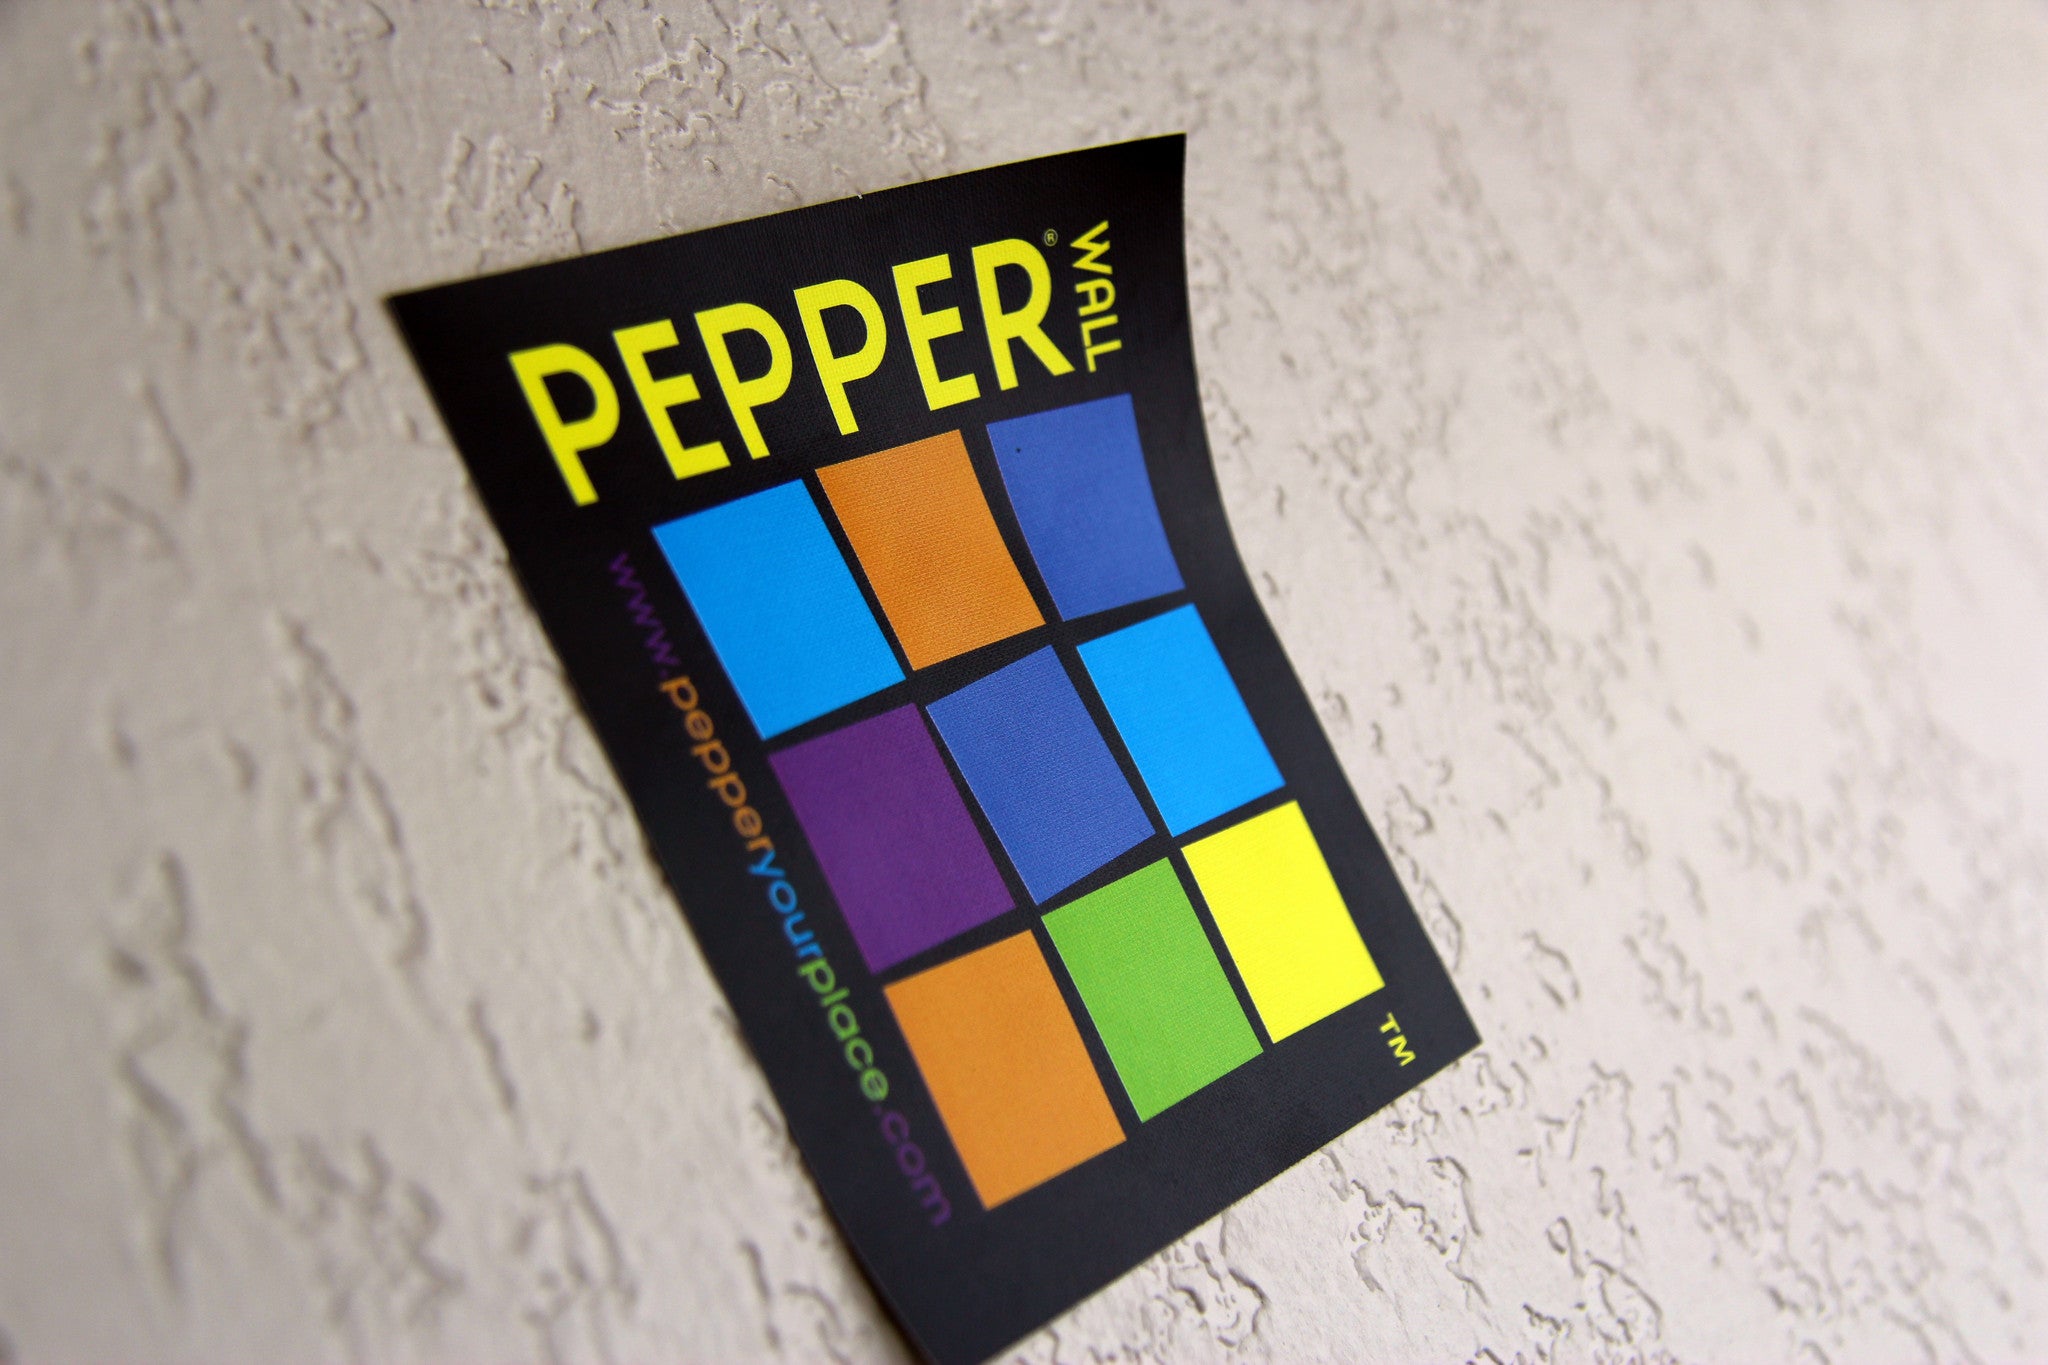 Welcome to Wall Pepper Gallery